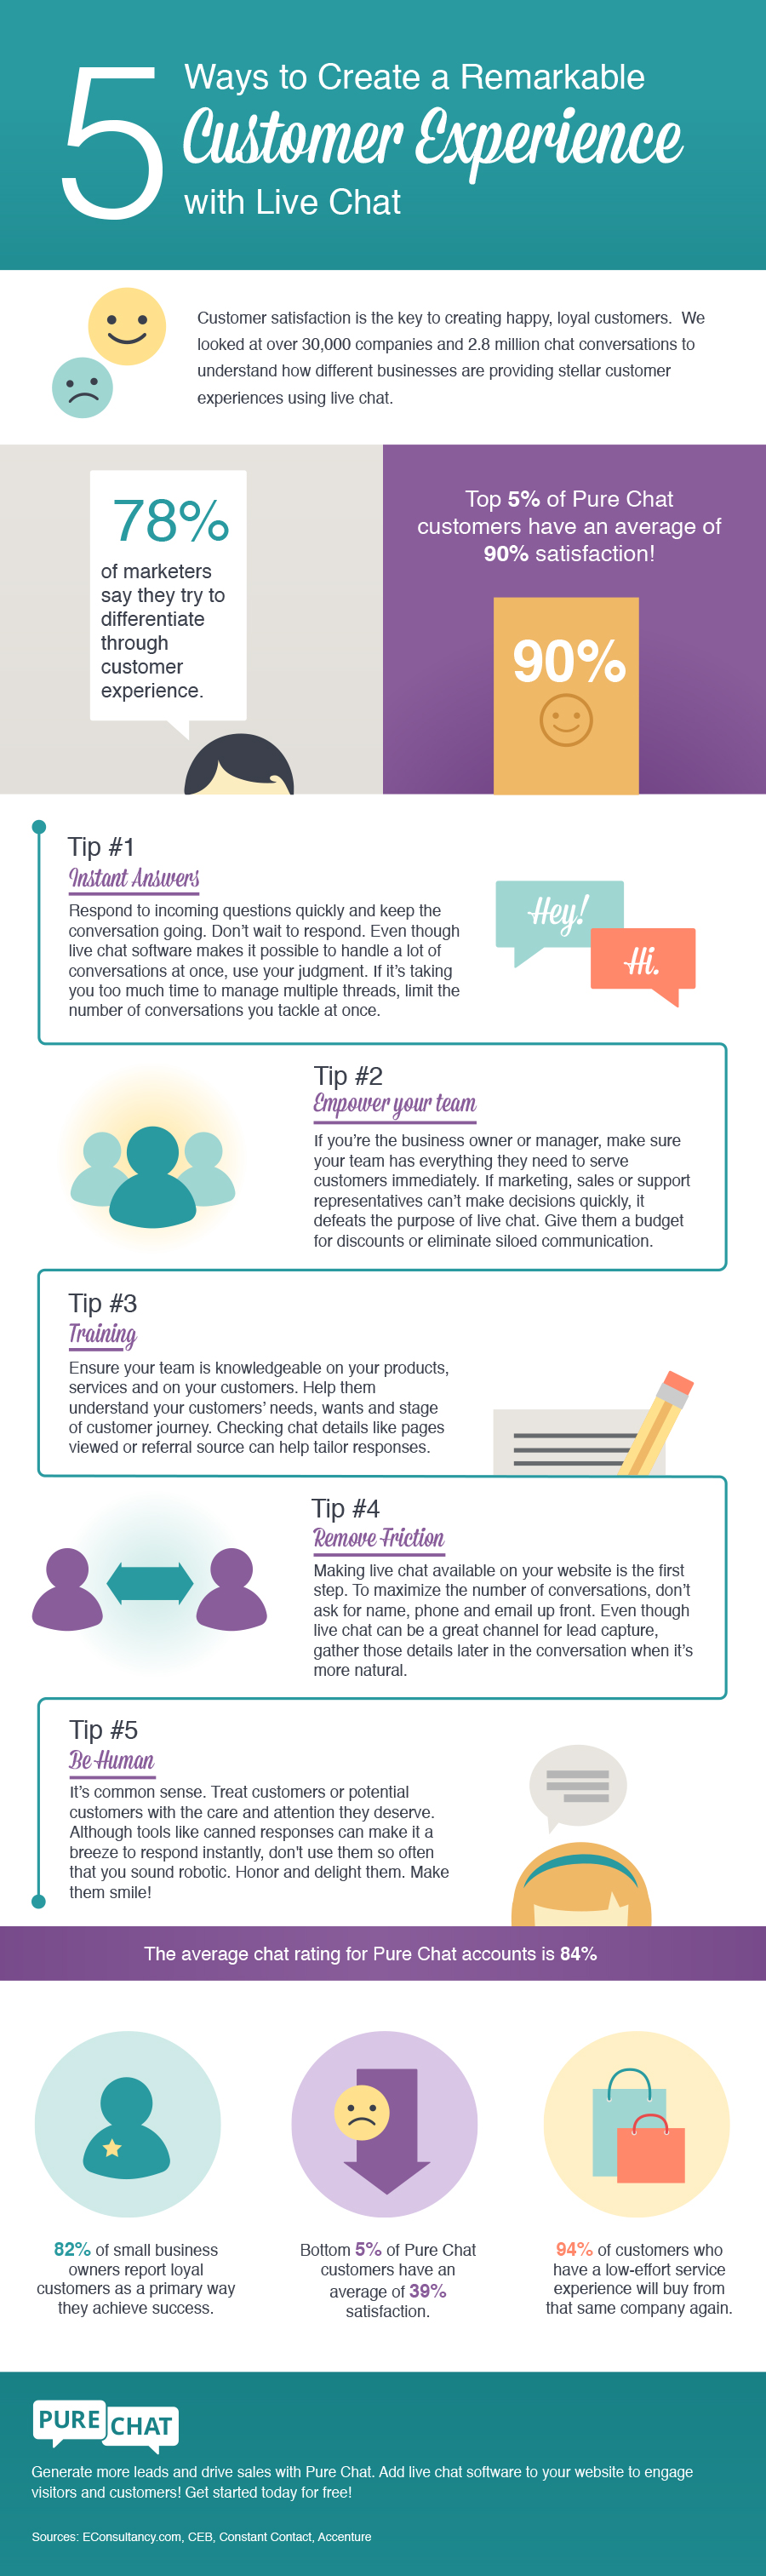 5 Ways to Create a Remarkable Customer Experience with Live Chat Infographic